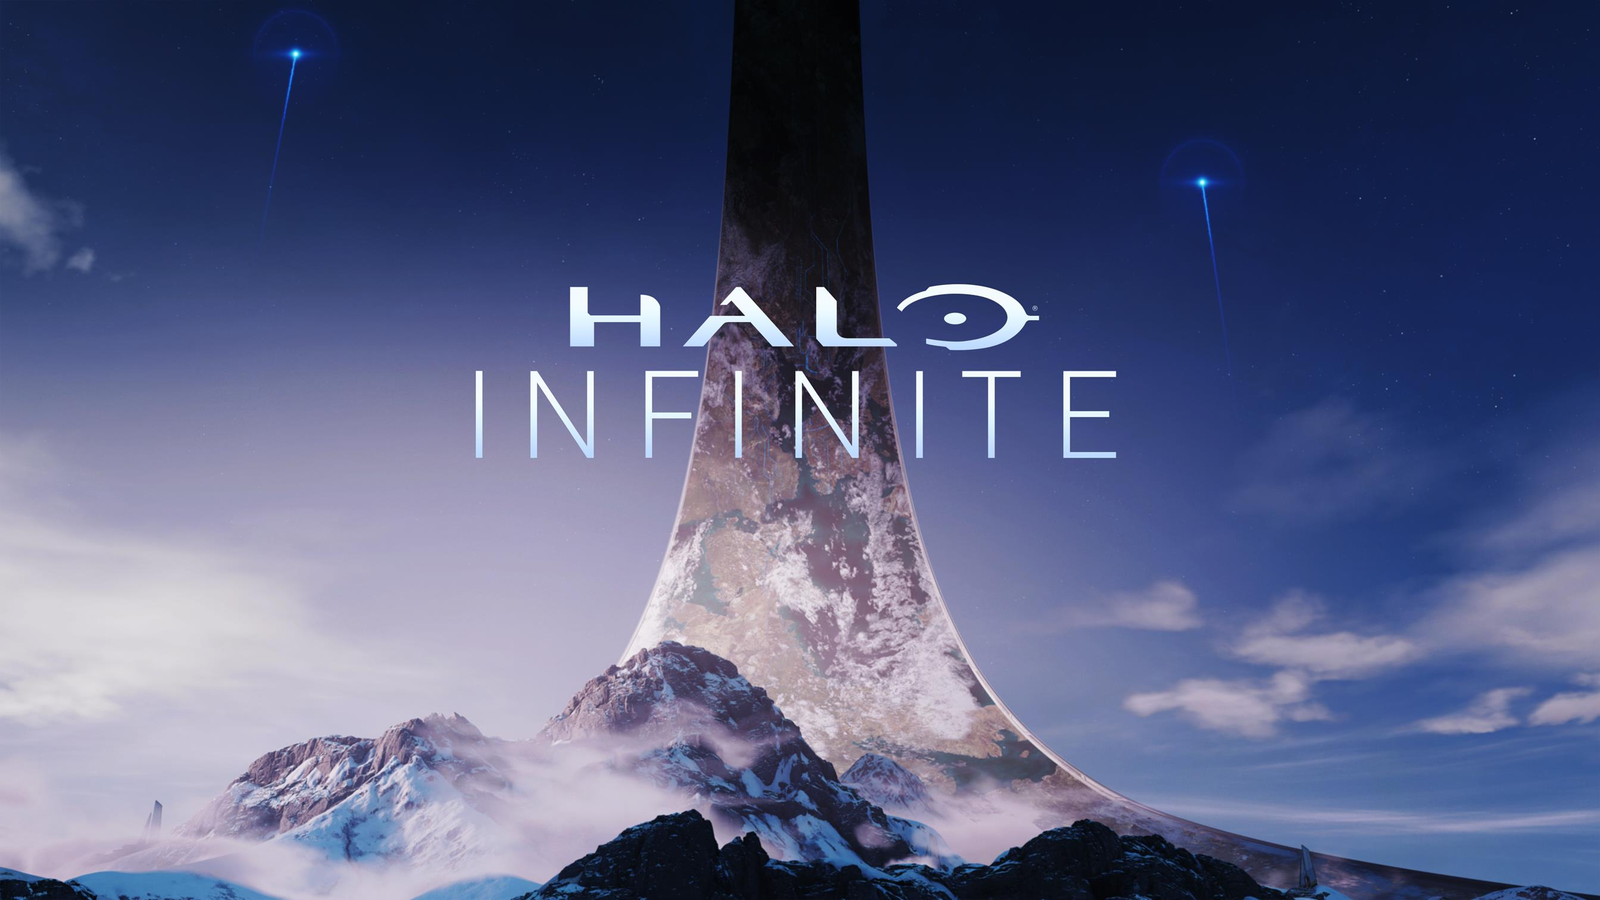 The Halo Infinite battle royale mode is here, just not from 343